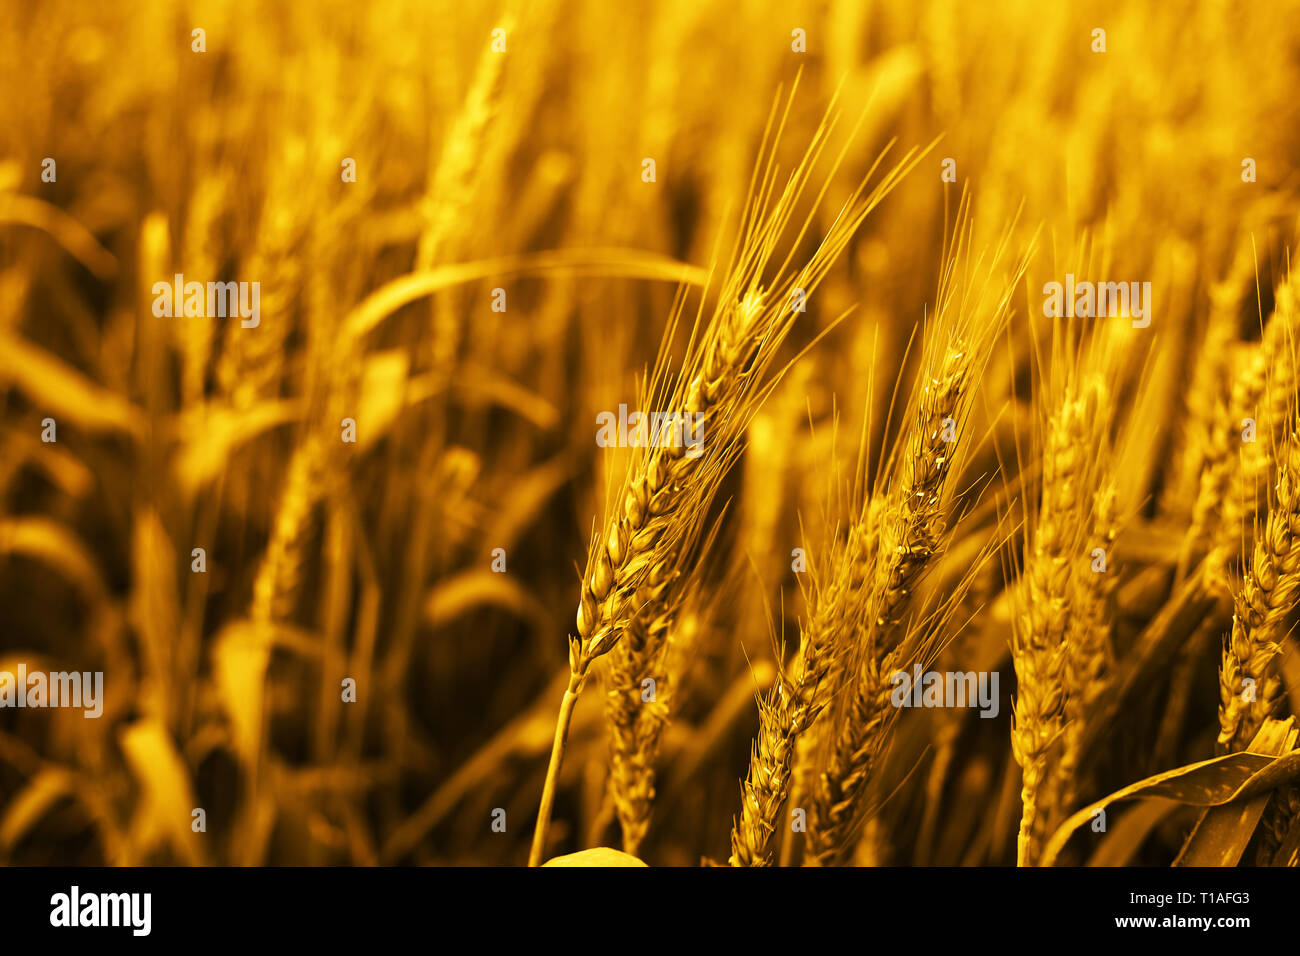 Picture of wheat fields for baisakhi festival in punjabi culture. Stock Photo